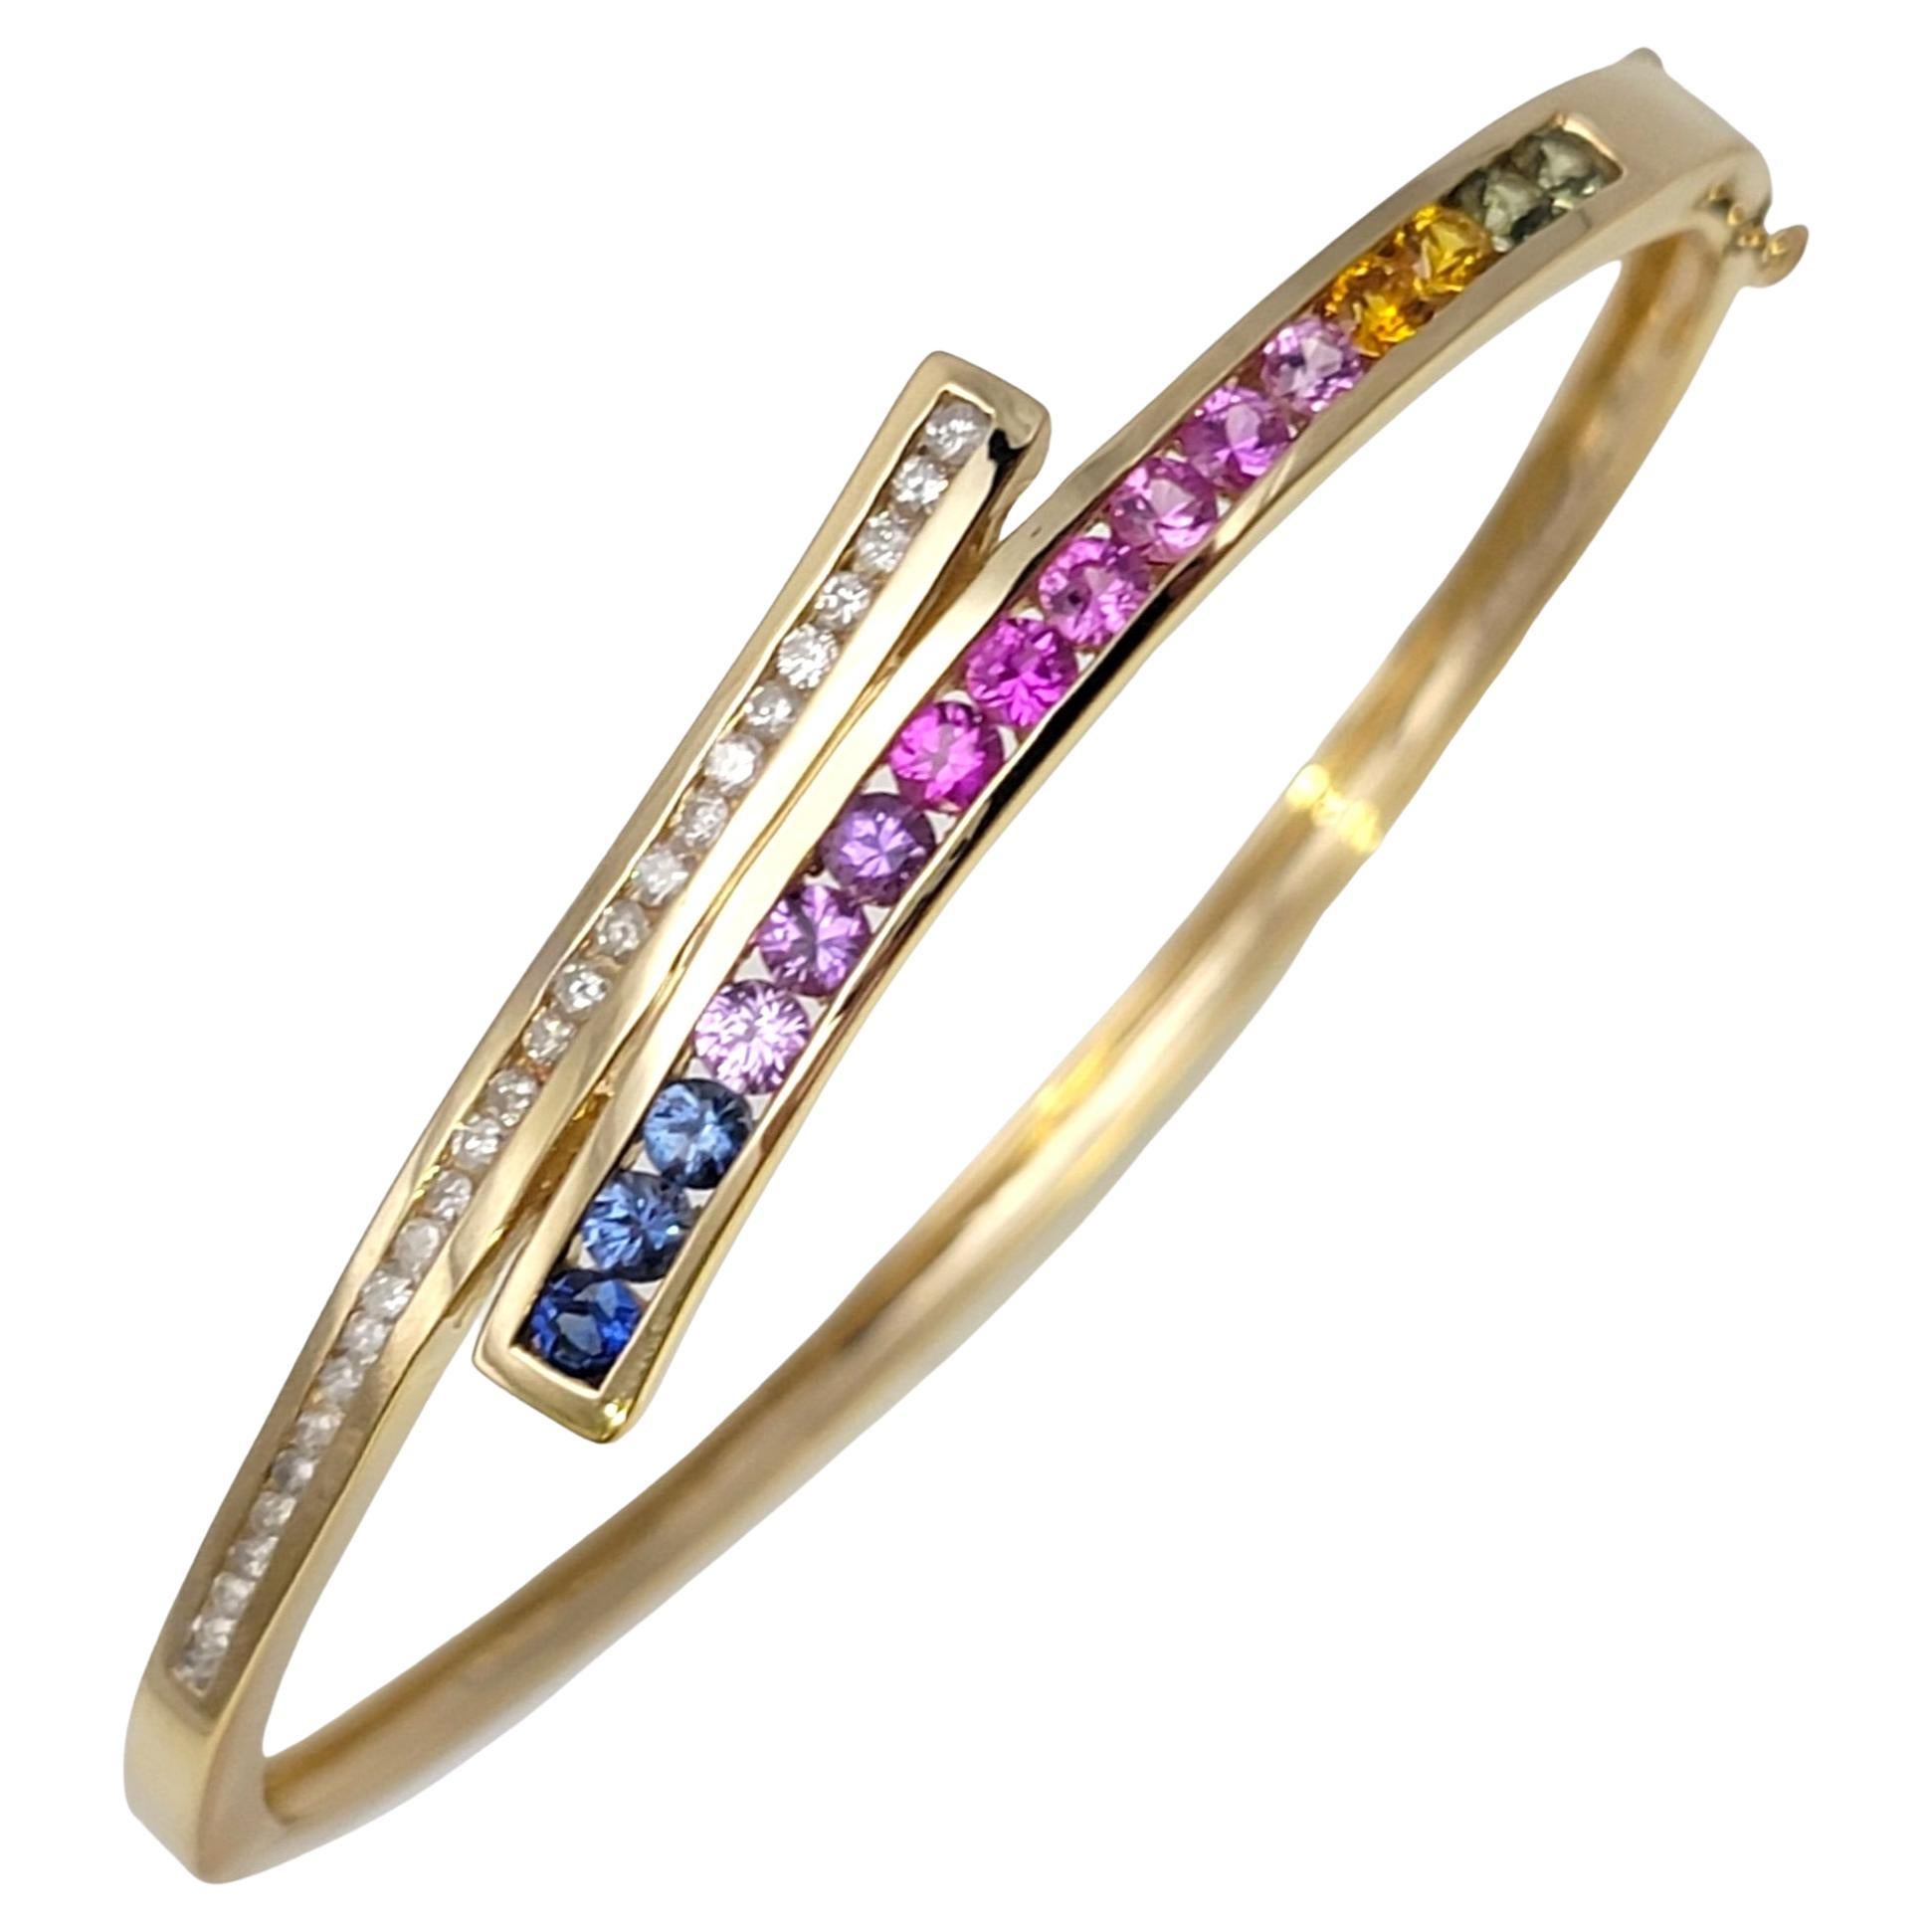 Shown here is an absolutely gorgeous bypass bracelet bursting with color and sparkle. Crafted with the utmost artistry, this incredible piece is adorned with a captivating combination of natural sapphires and diamonds, set in the luxurious 14 karat